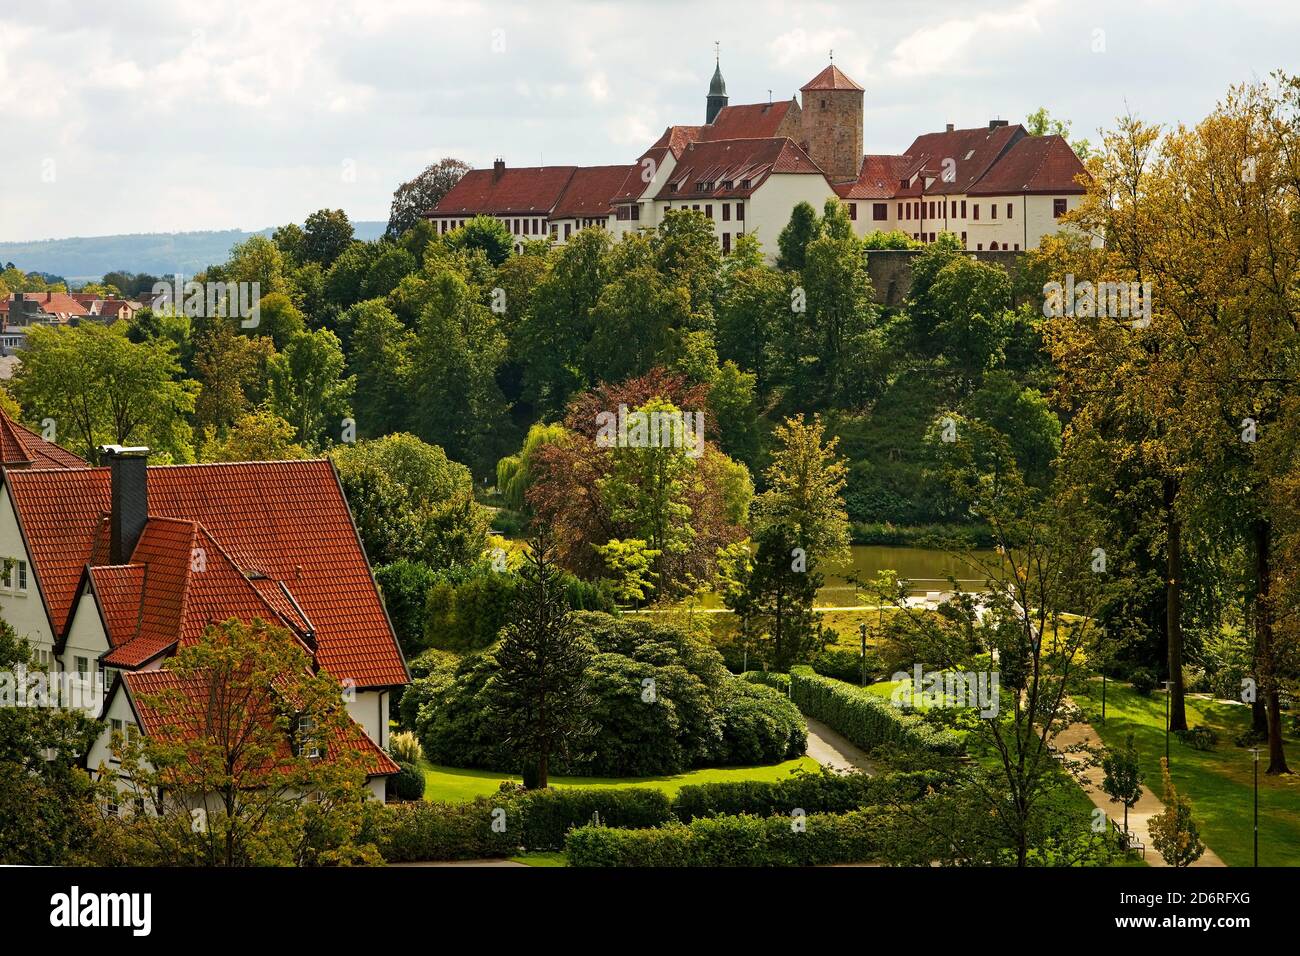 castle Iburg and abbey above the town, Germany, Lower Saxony, Bad Iburg Stock Photo